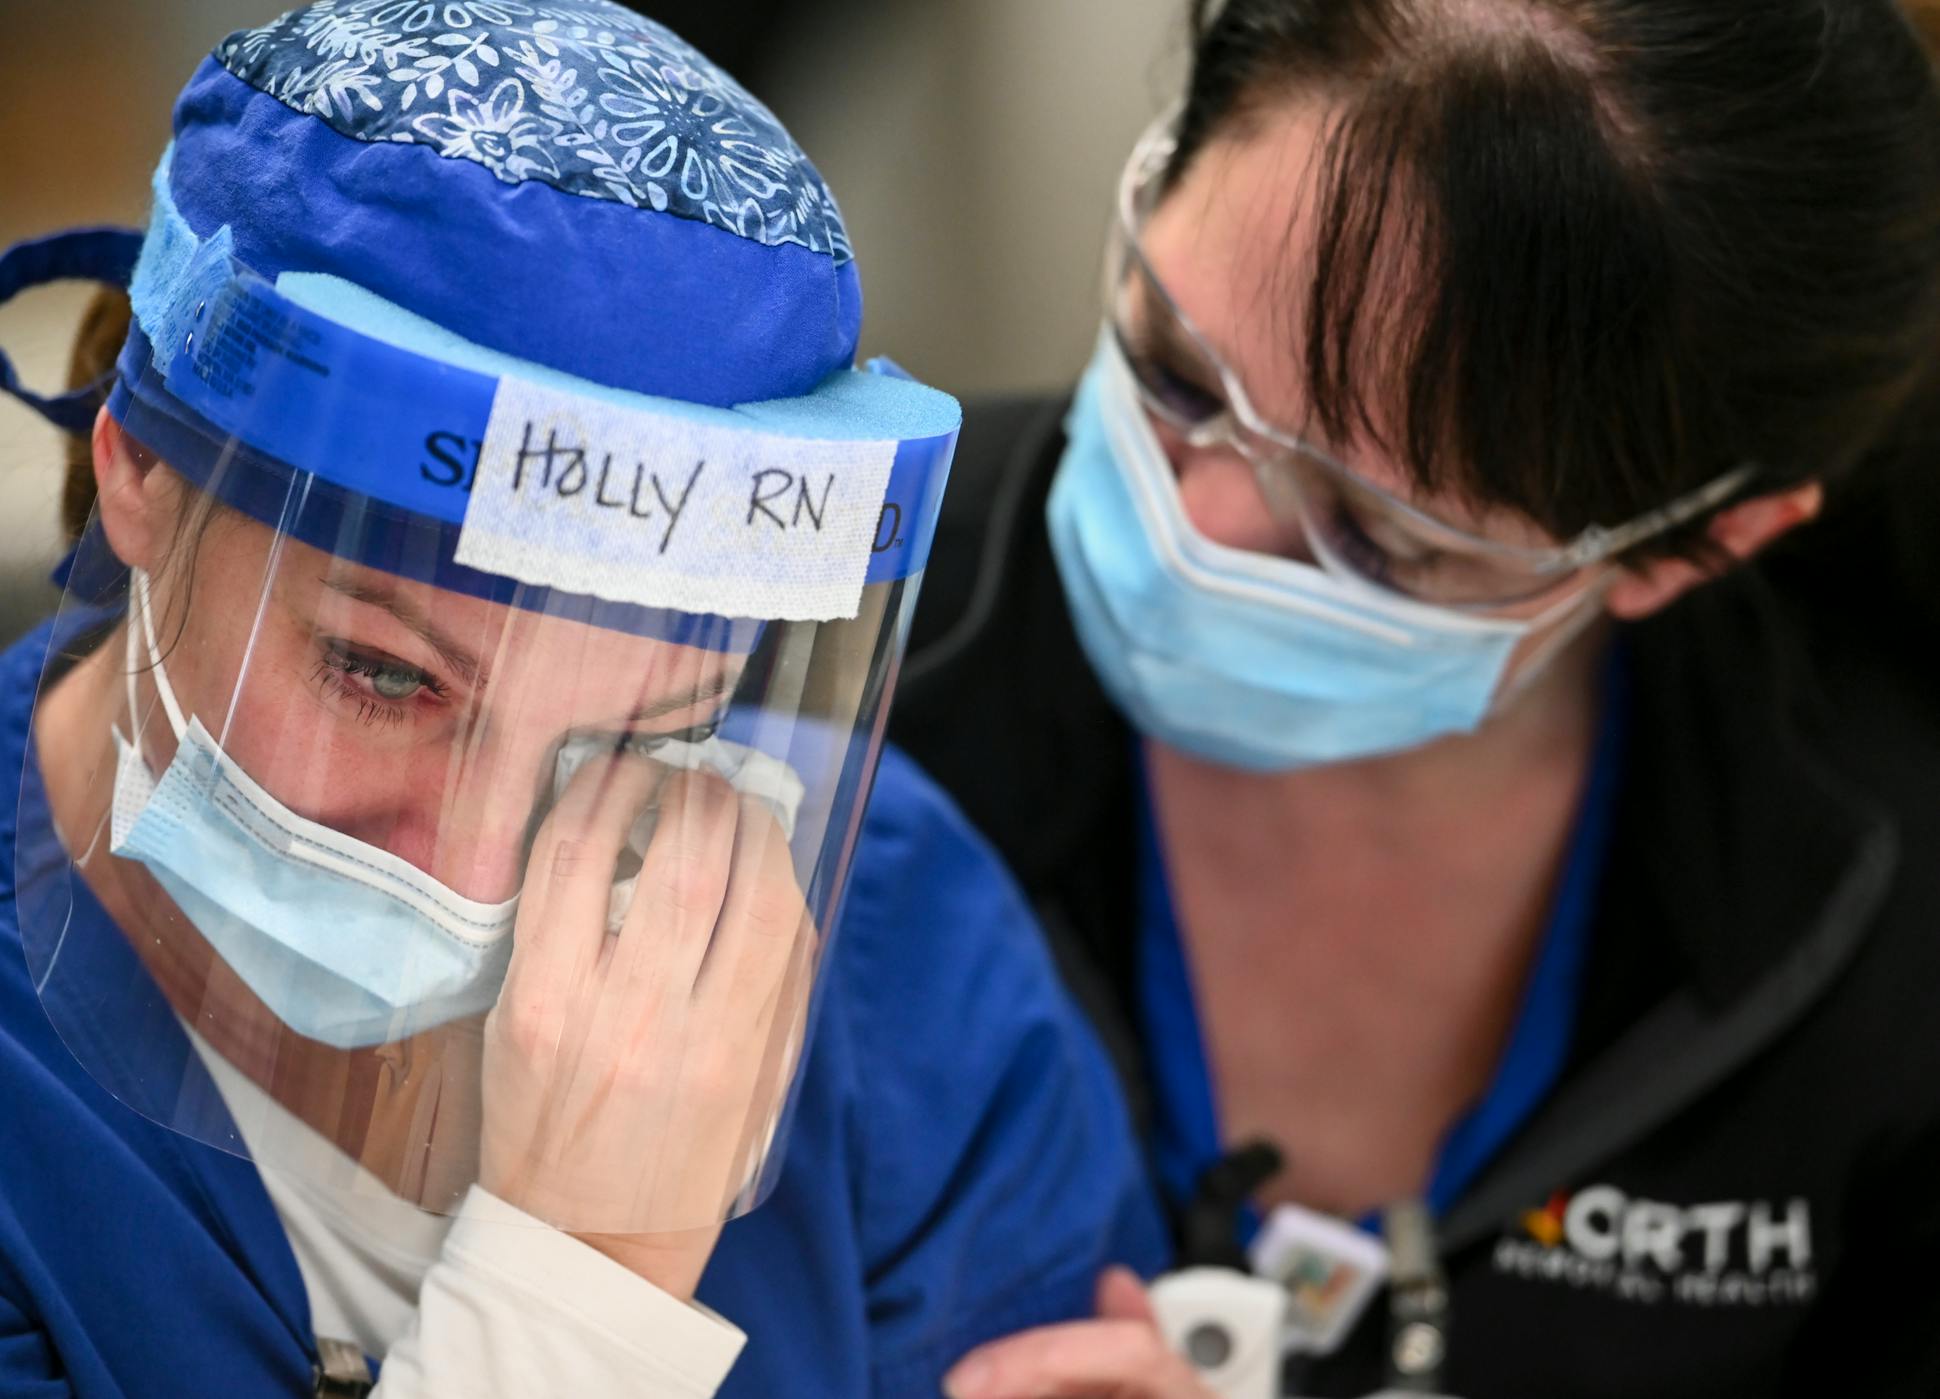 After losing her mother-in-law to COVID, “I'm struggling. They know it,” Holly Vilione said as she was comforted by friend and fellow ICU nurse Amy Berwald.